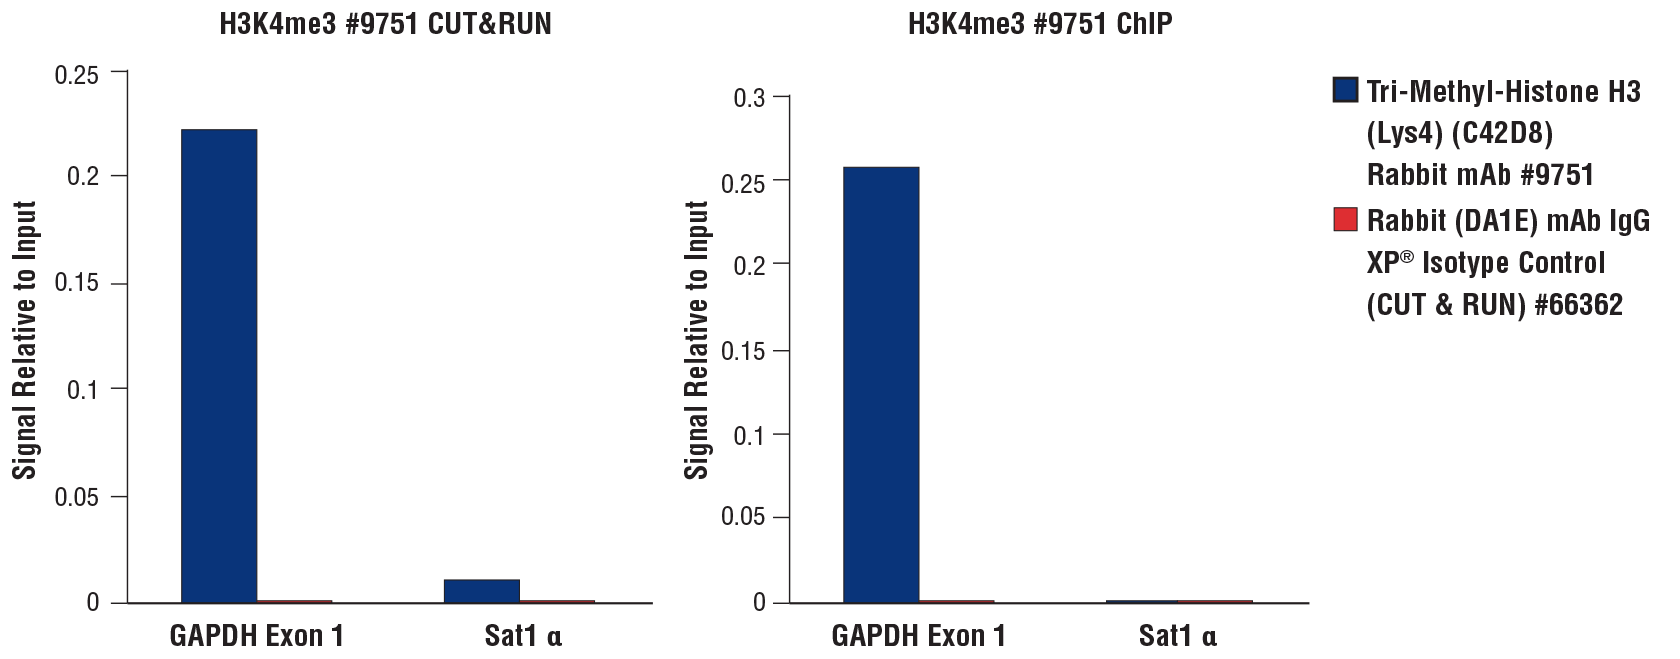 H3K4me3 qPCR results for CUT&RUN and ChIP